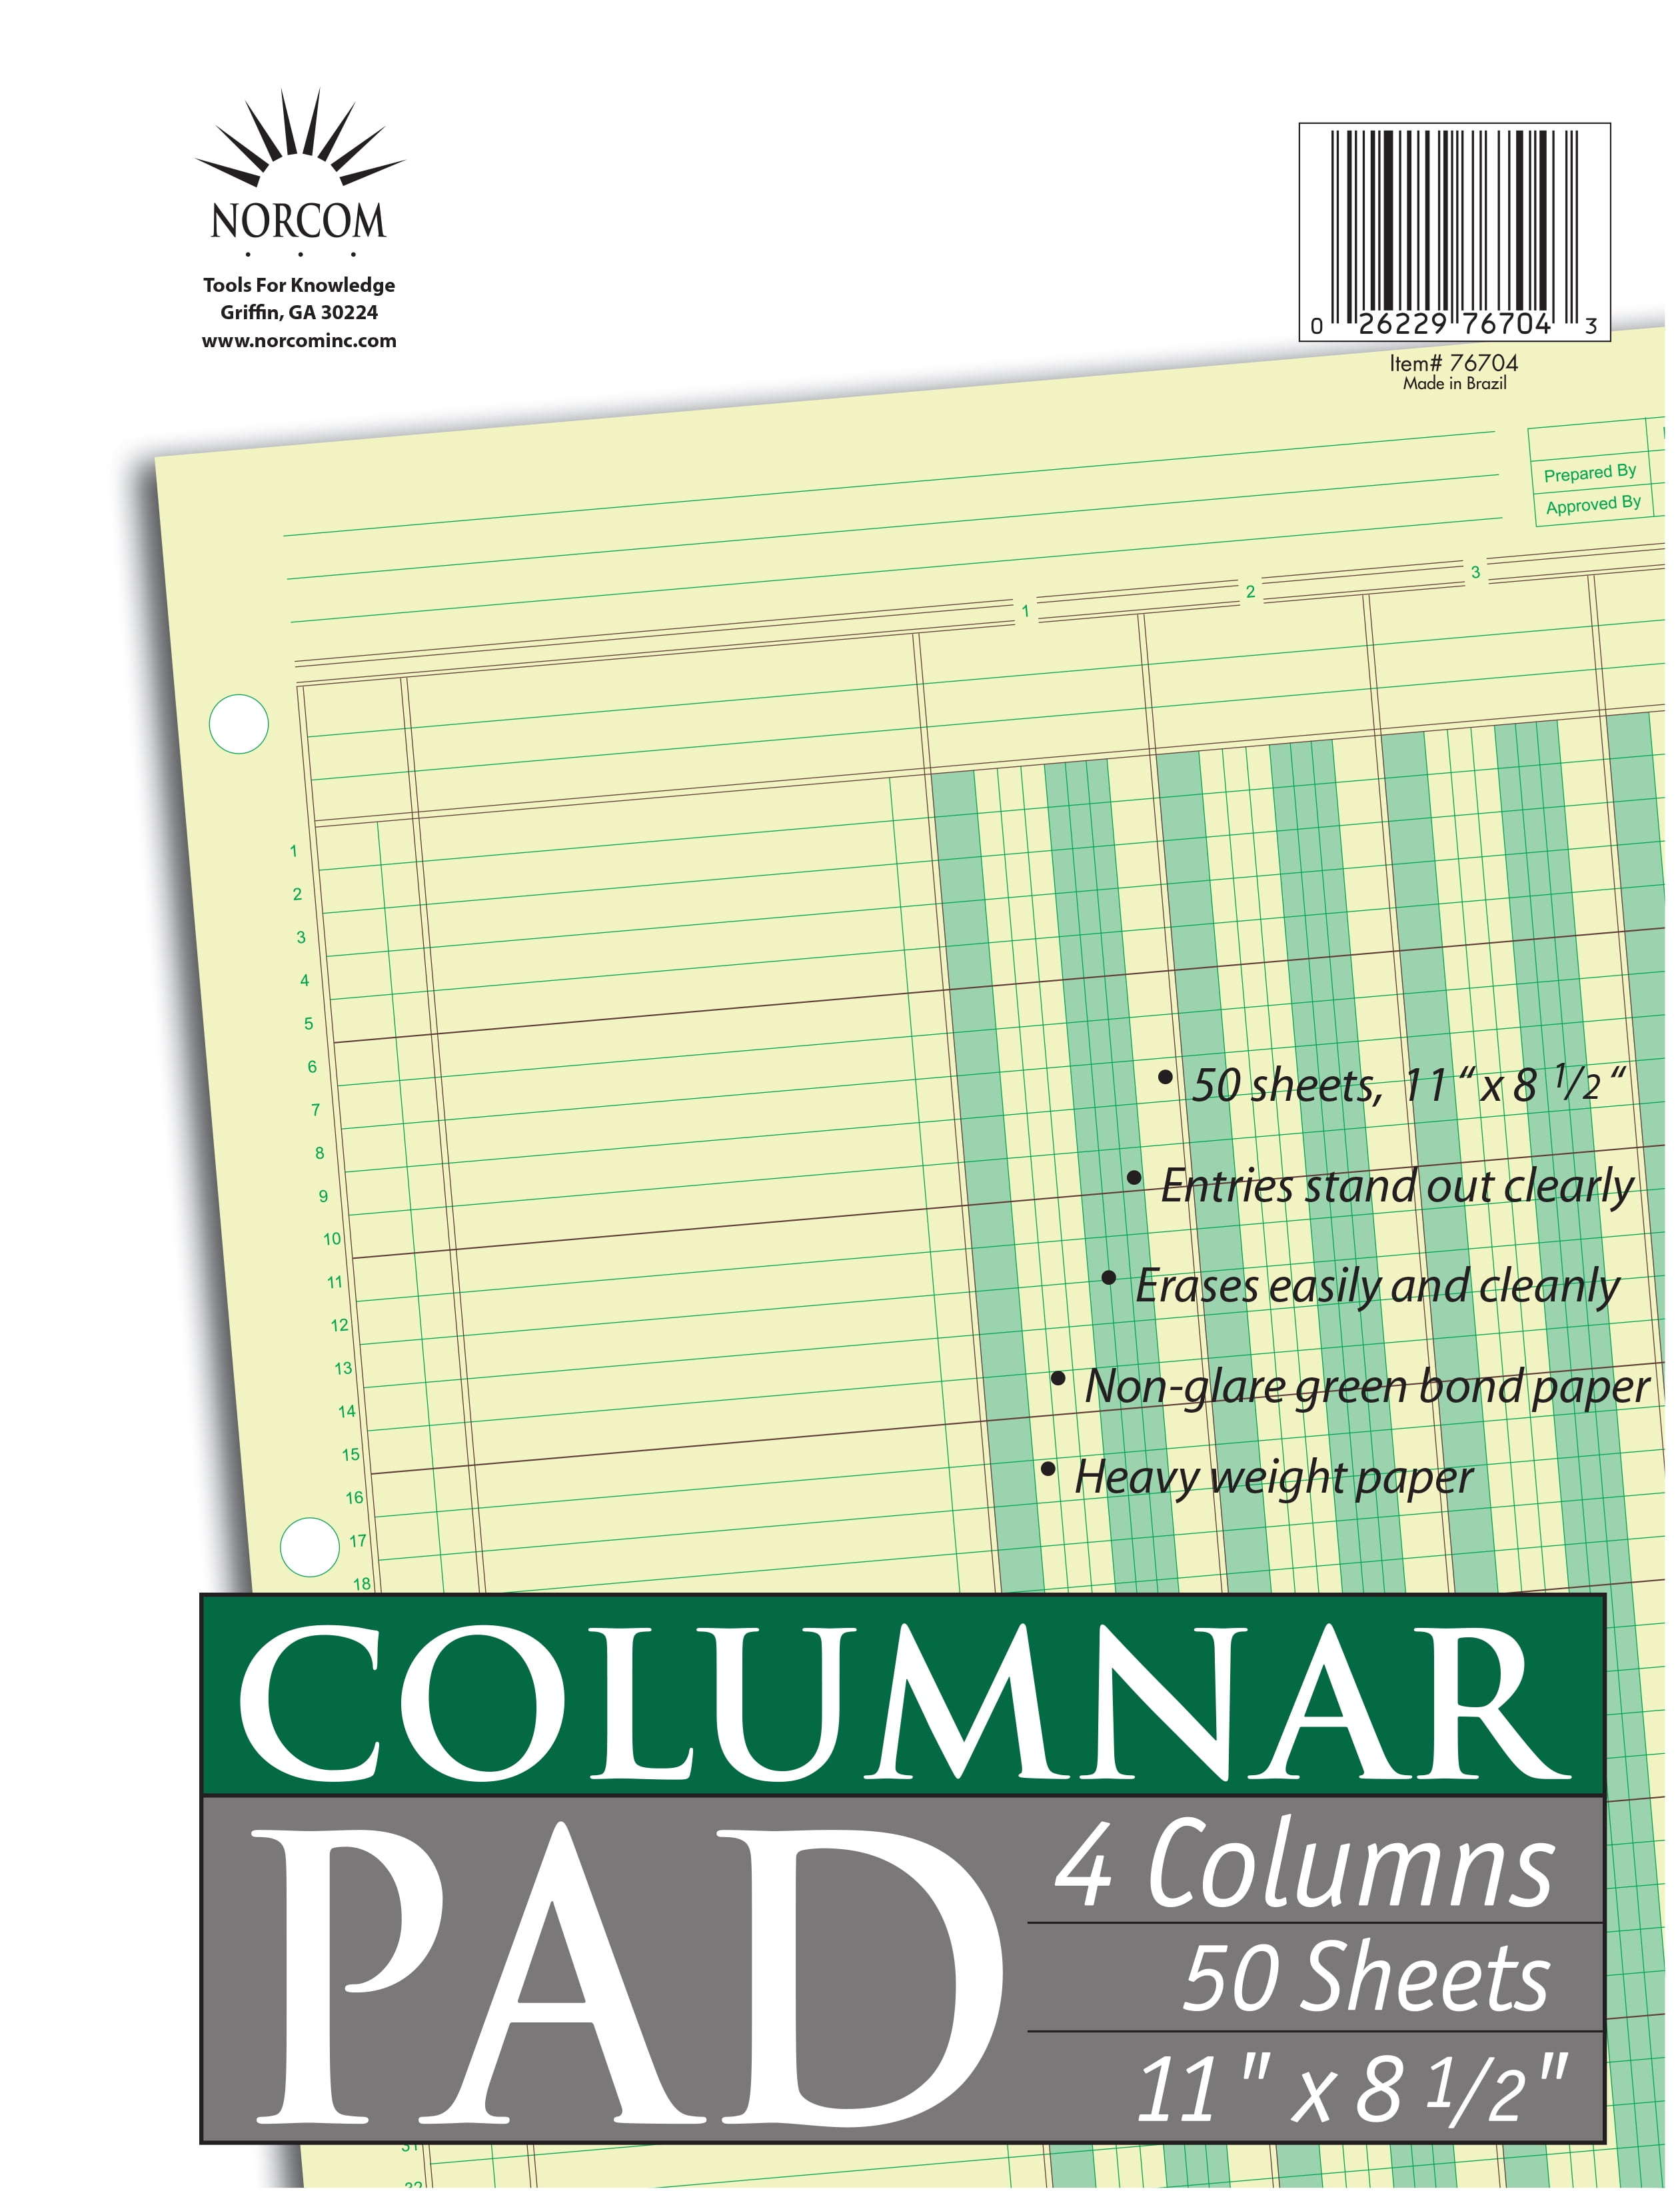 Time Record Sheets 100 No Carbon Required Two-Part Sheets per Package 8.5-x-11-inch 